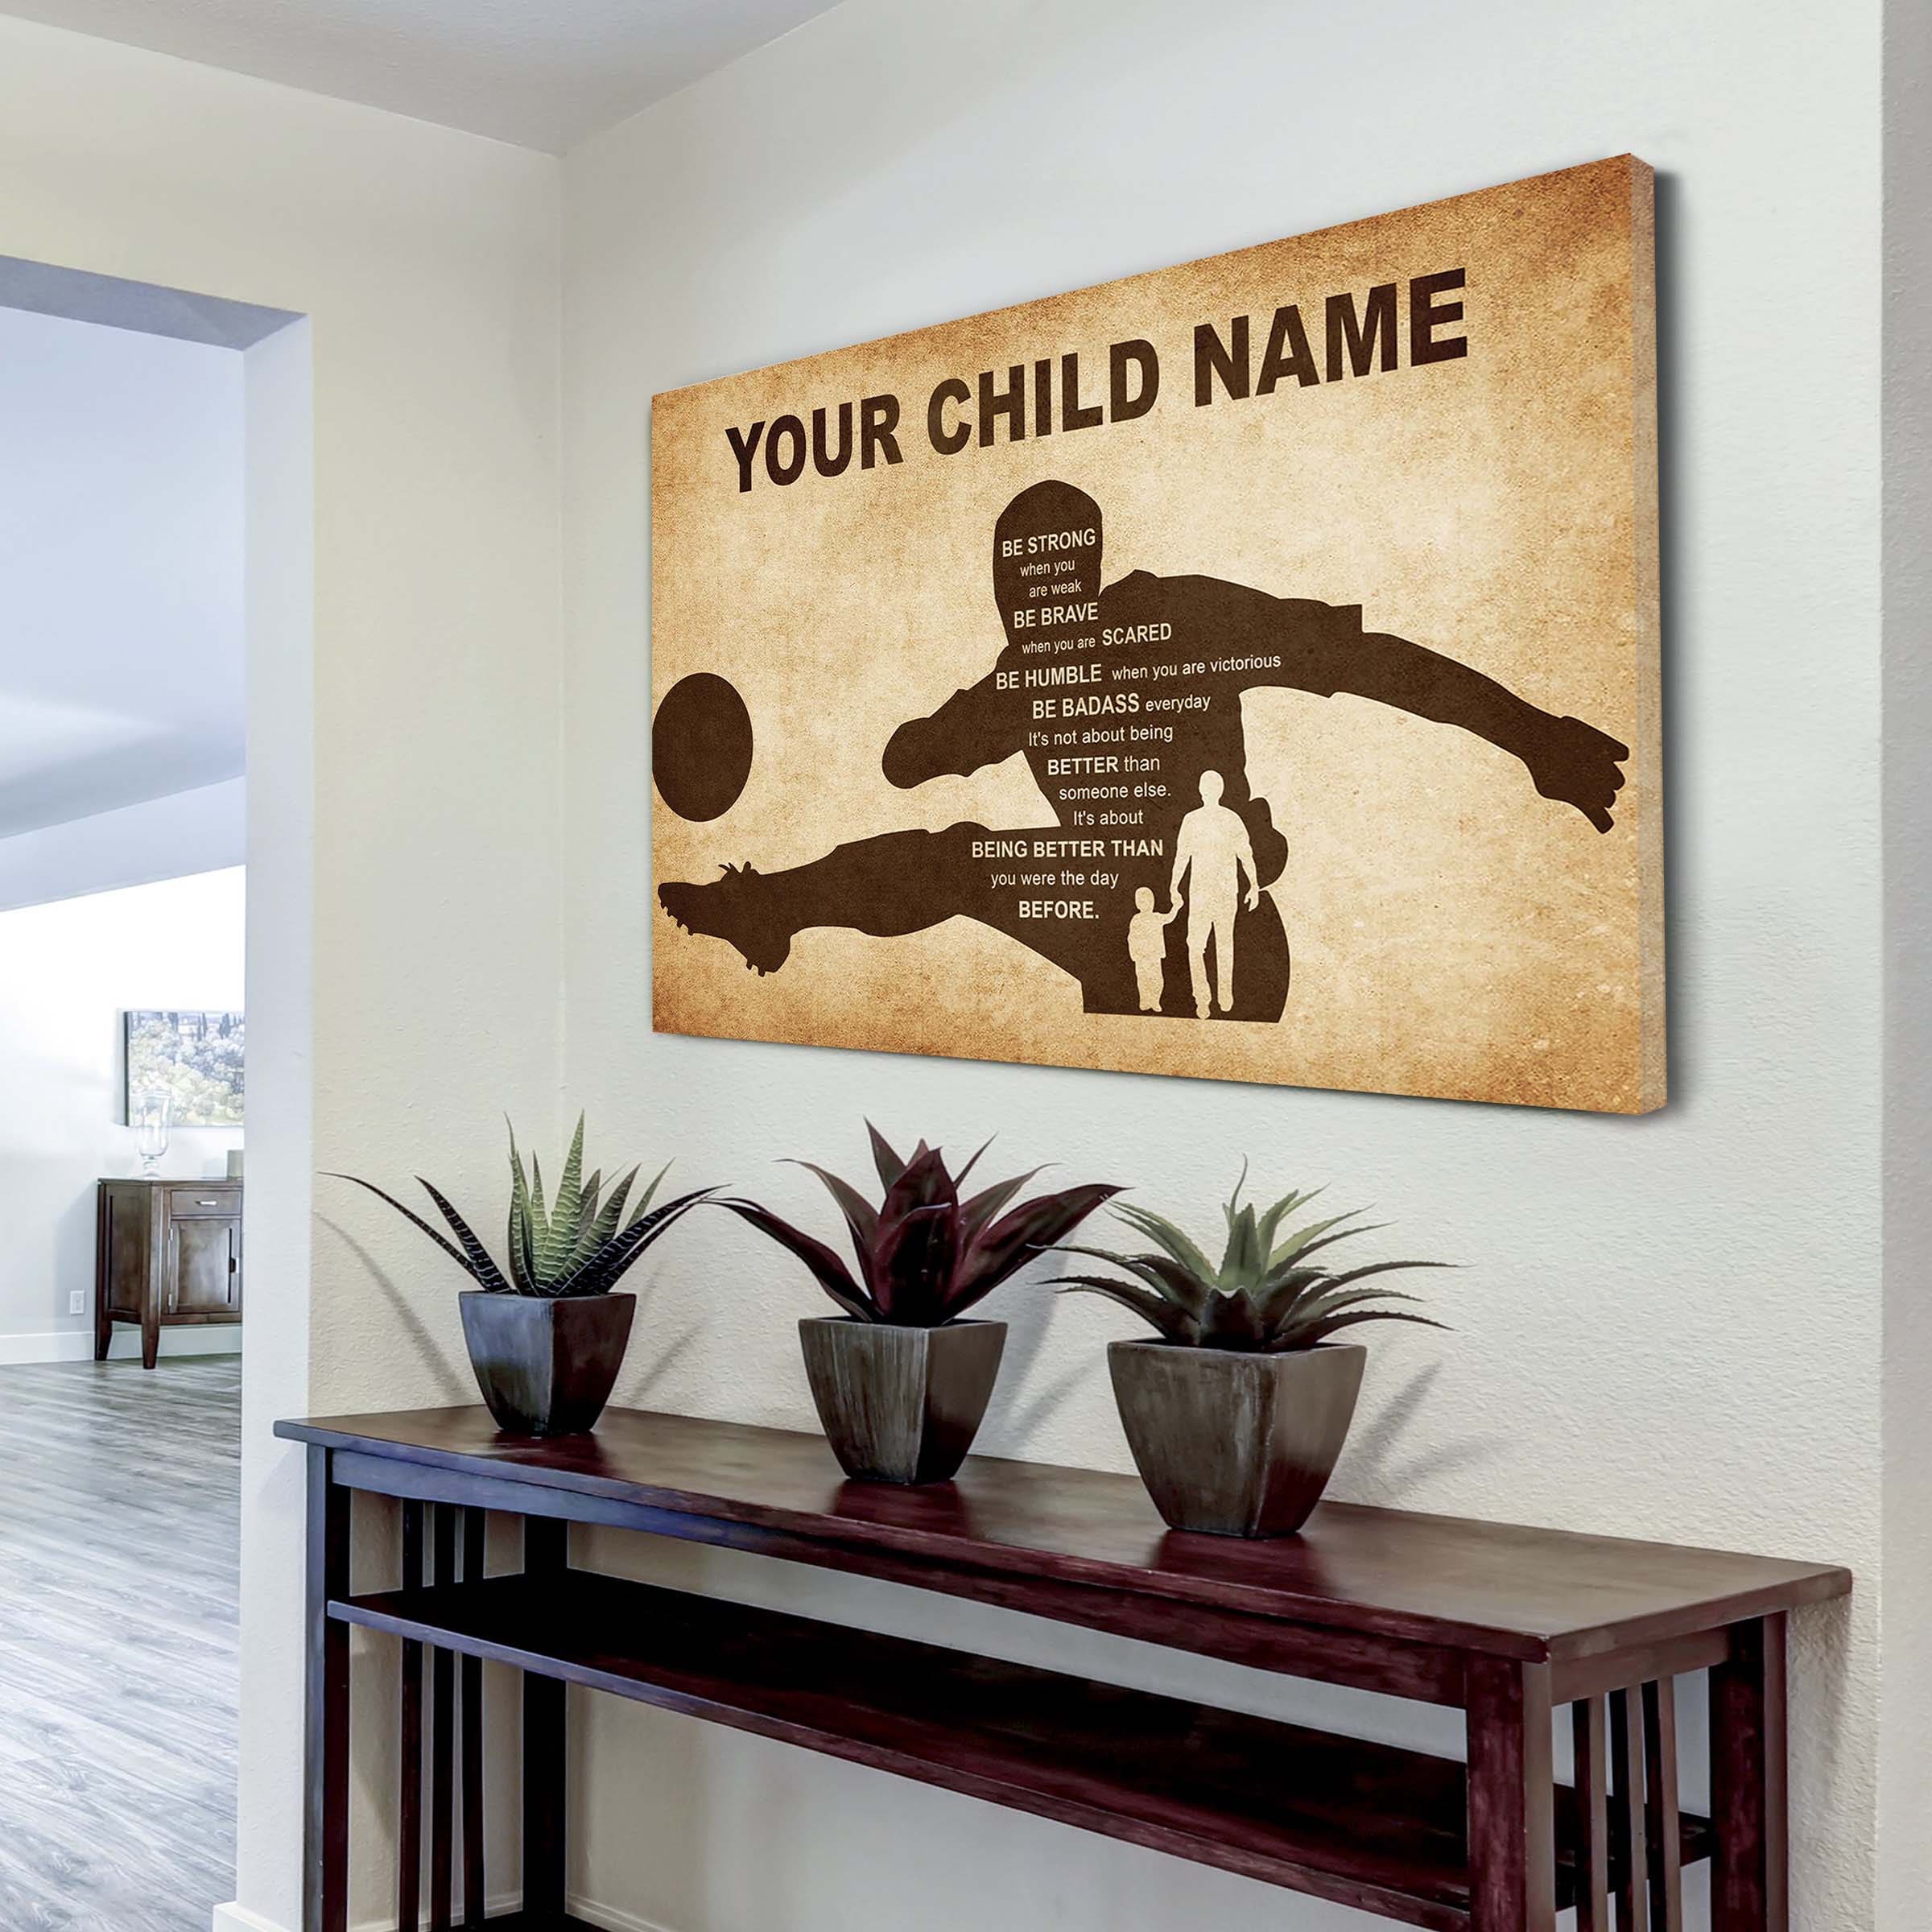 Basketball Personalized Your Child Name From Dad To Son Basketball Poster Canvas Be Strong When You Are Weak Be Brave When You Are Scared It's Not About Being Better Than Someone Else It's About Being Better Than You Were The Day Before